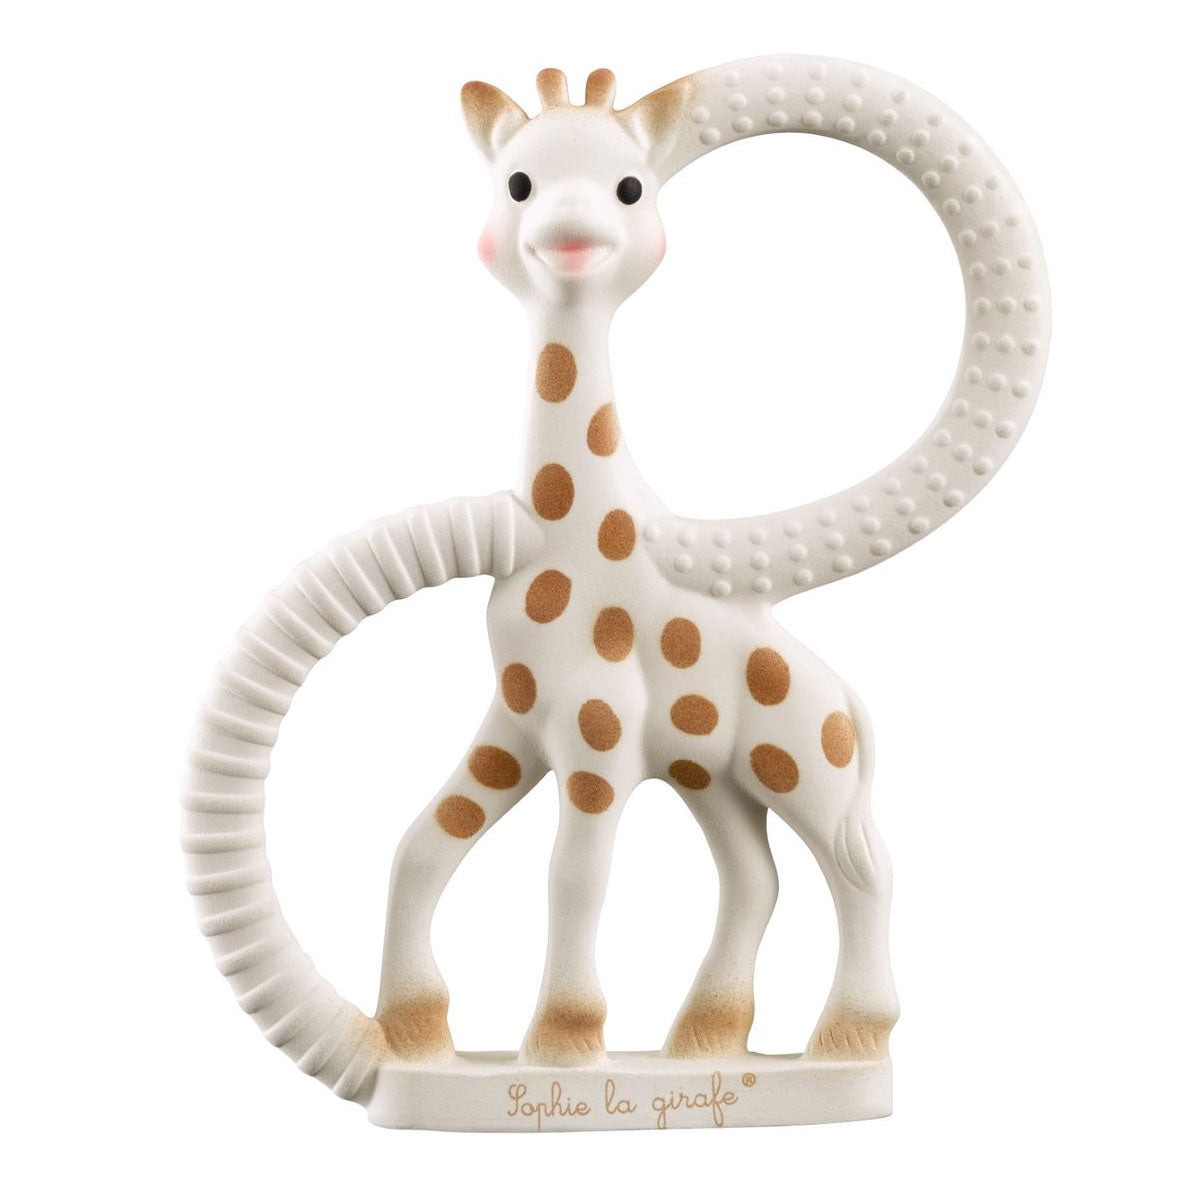 Made from the same natural rubber and food grade paints as the original Sophie the Giraffe.  Great for little hands to hold and ideal for soothing painful gums.  Features a variety of textures to relieve baby at different stages of teething.